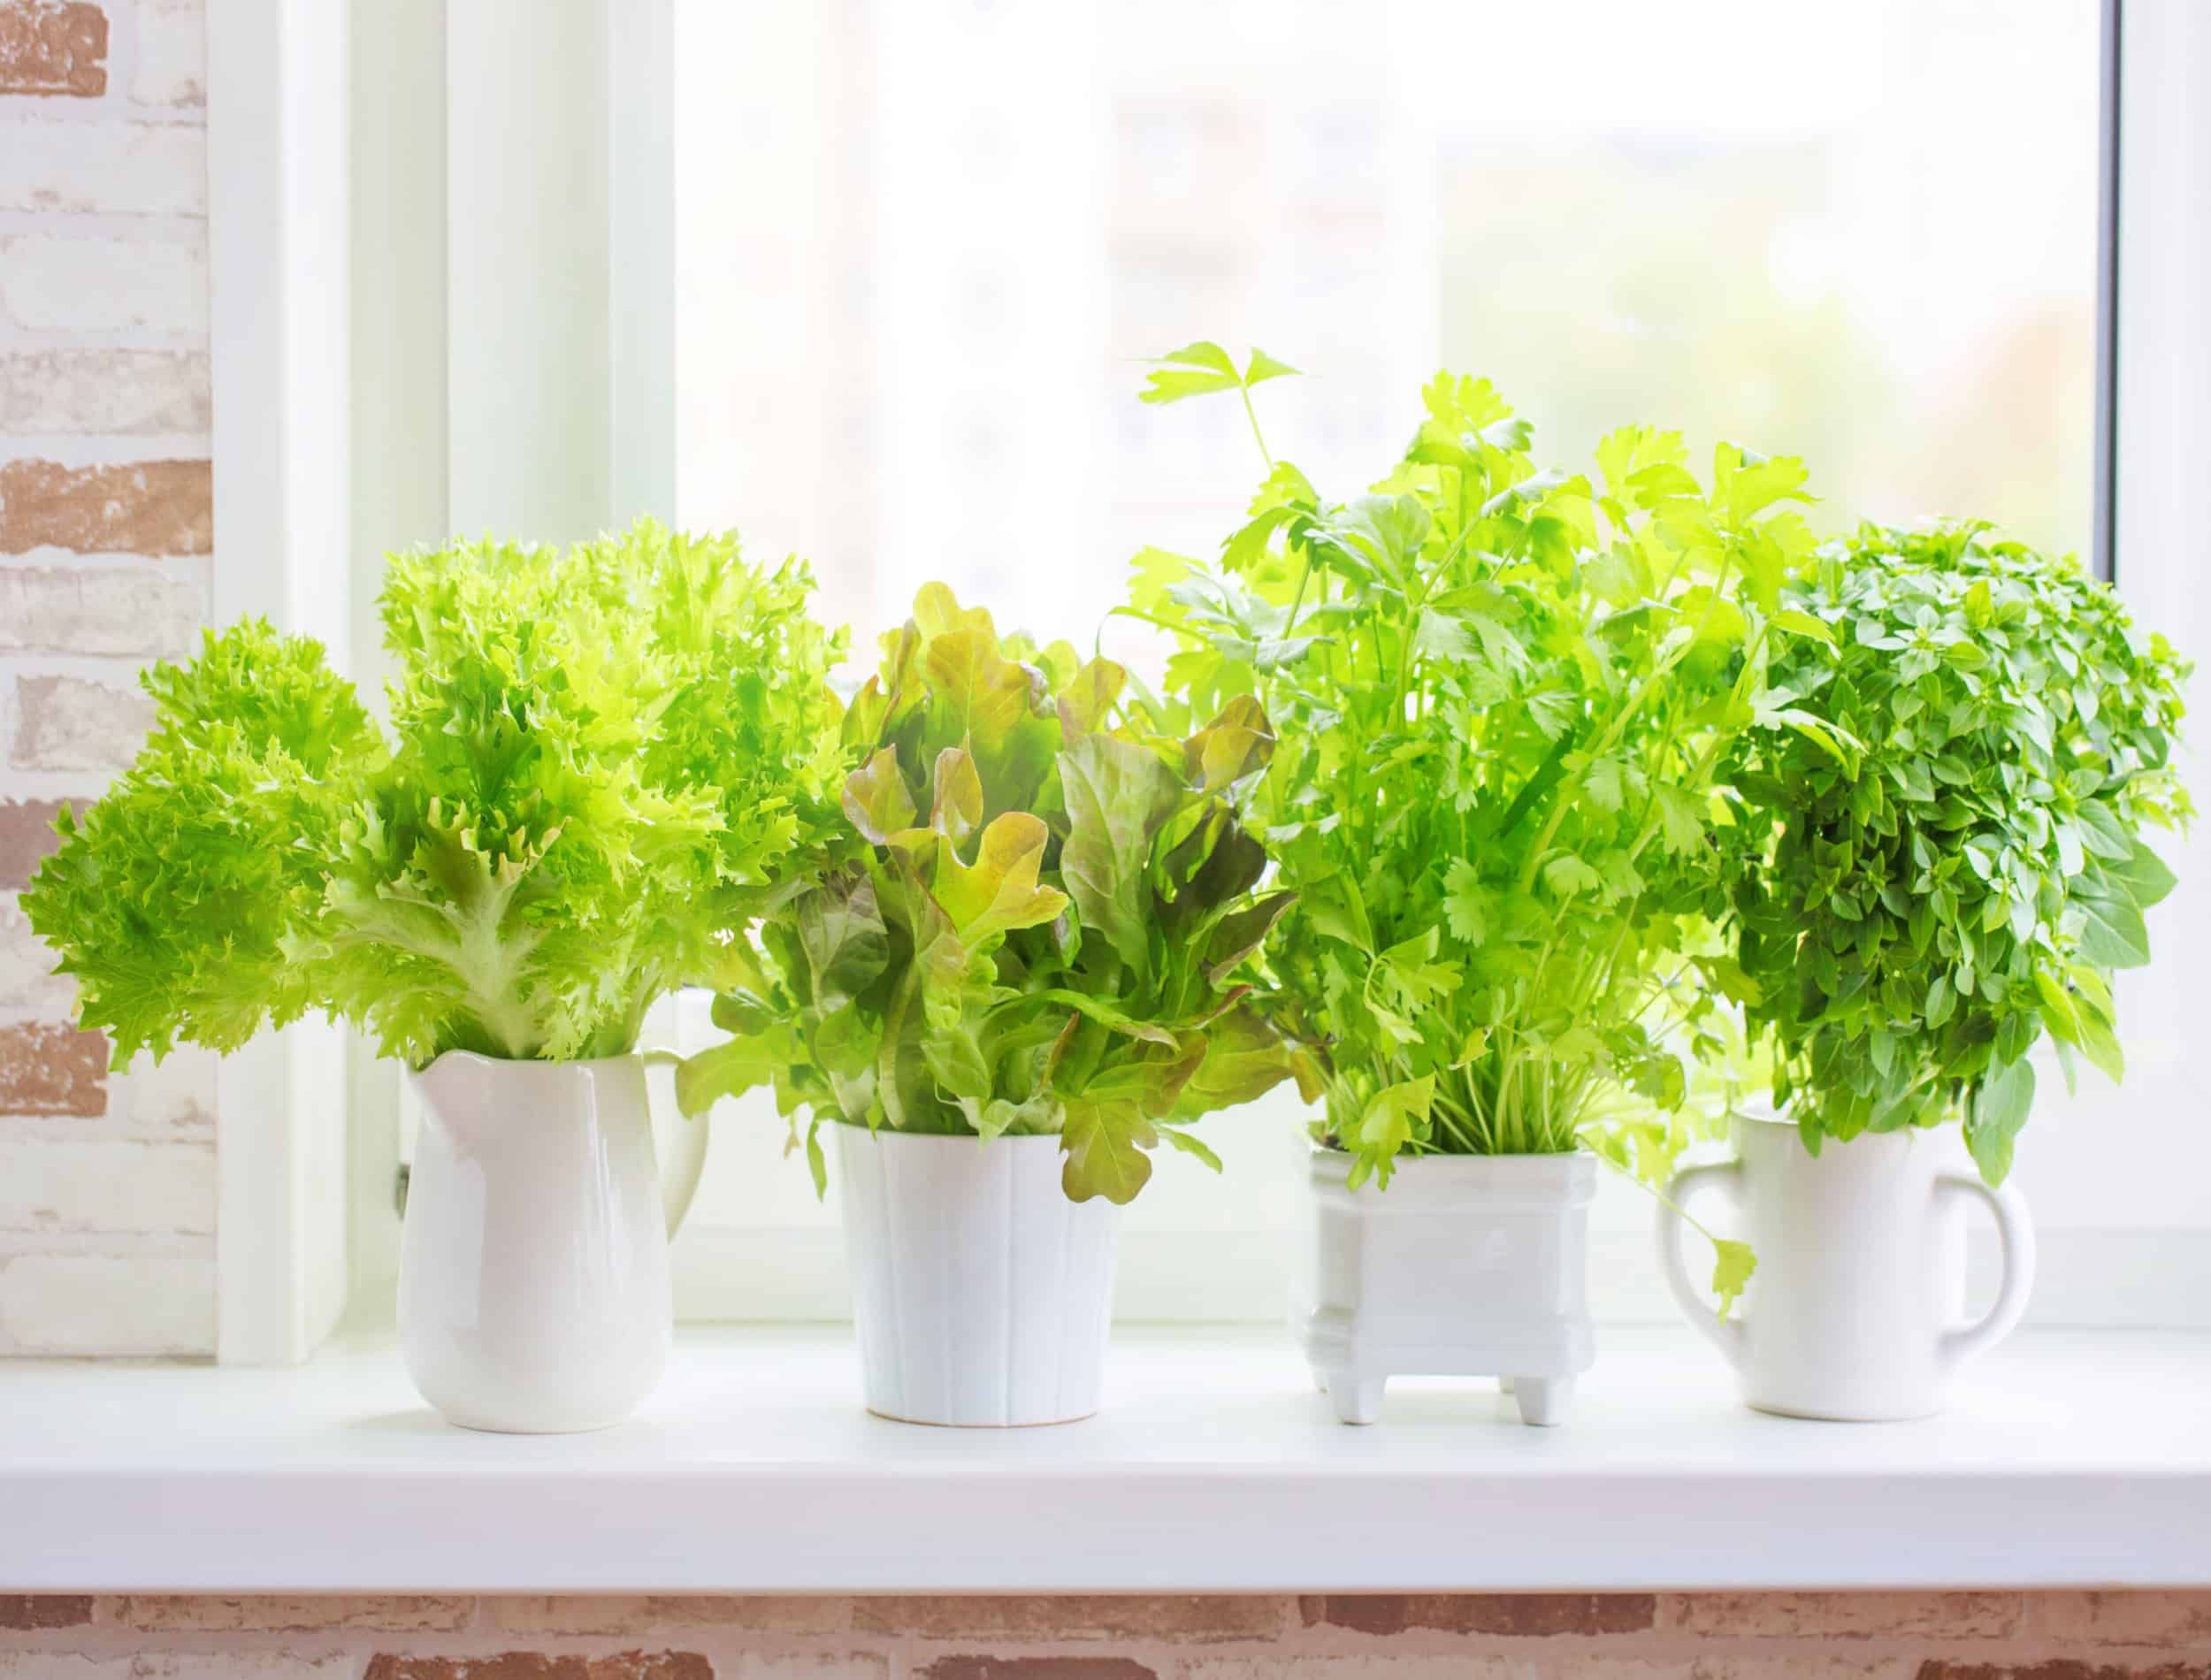 Fresh aromatic culinary herbs in white pots on windowsill. Lettuce, leaf celery and small leaved basil. Kitchen garden of herbs.